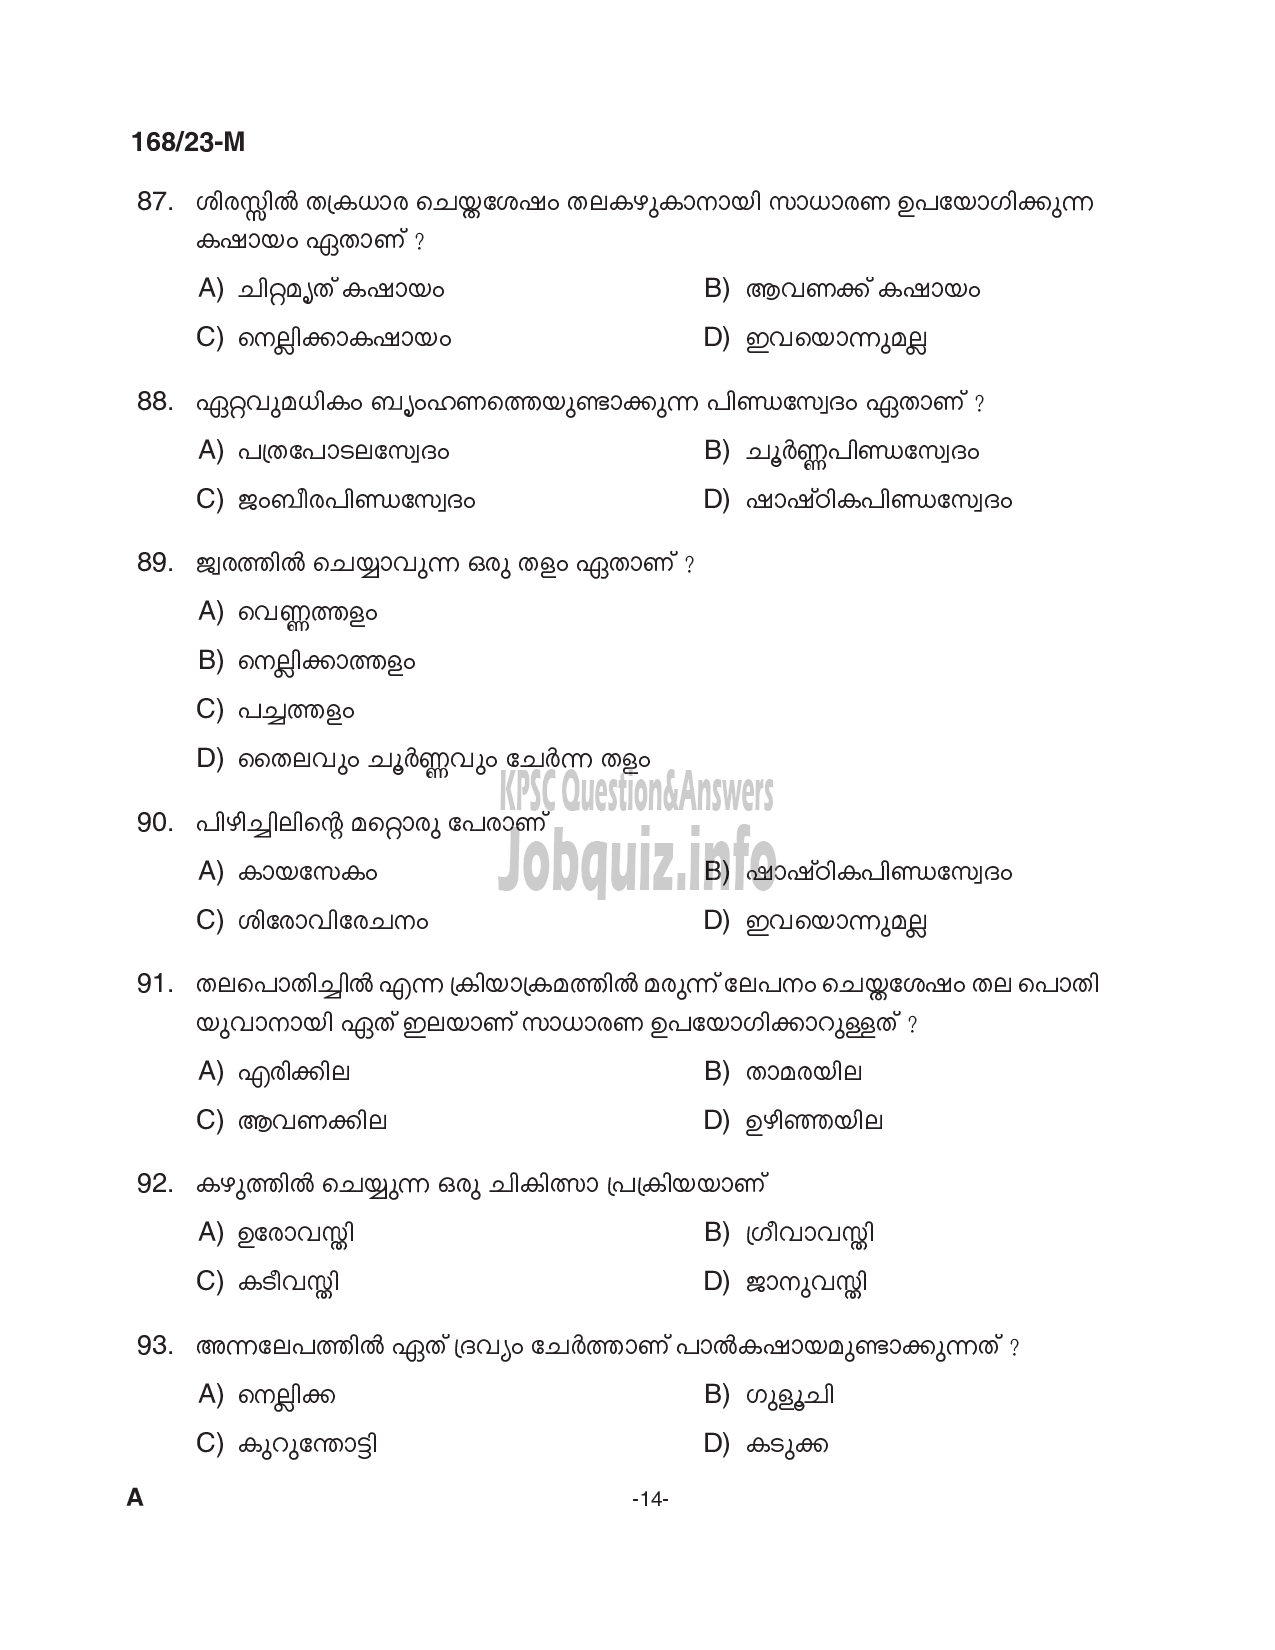 Kerala PSC Question Paper - AYURVEDA THERAPIST(Indian Systems of Medicine,Govt. Ayurveda Colleges) -14